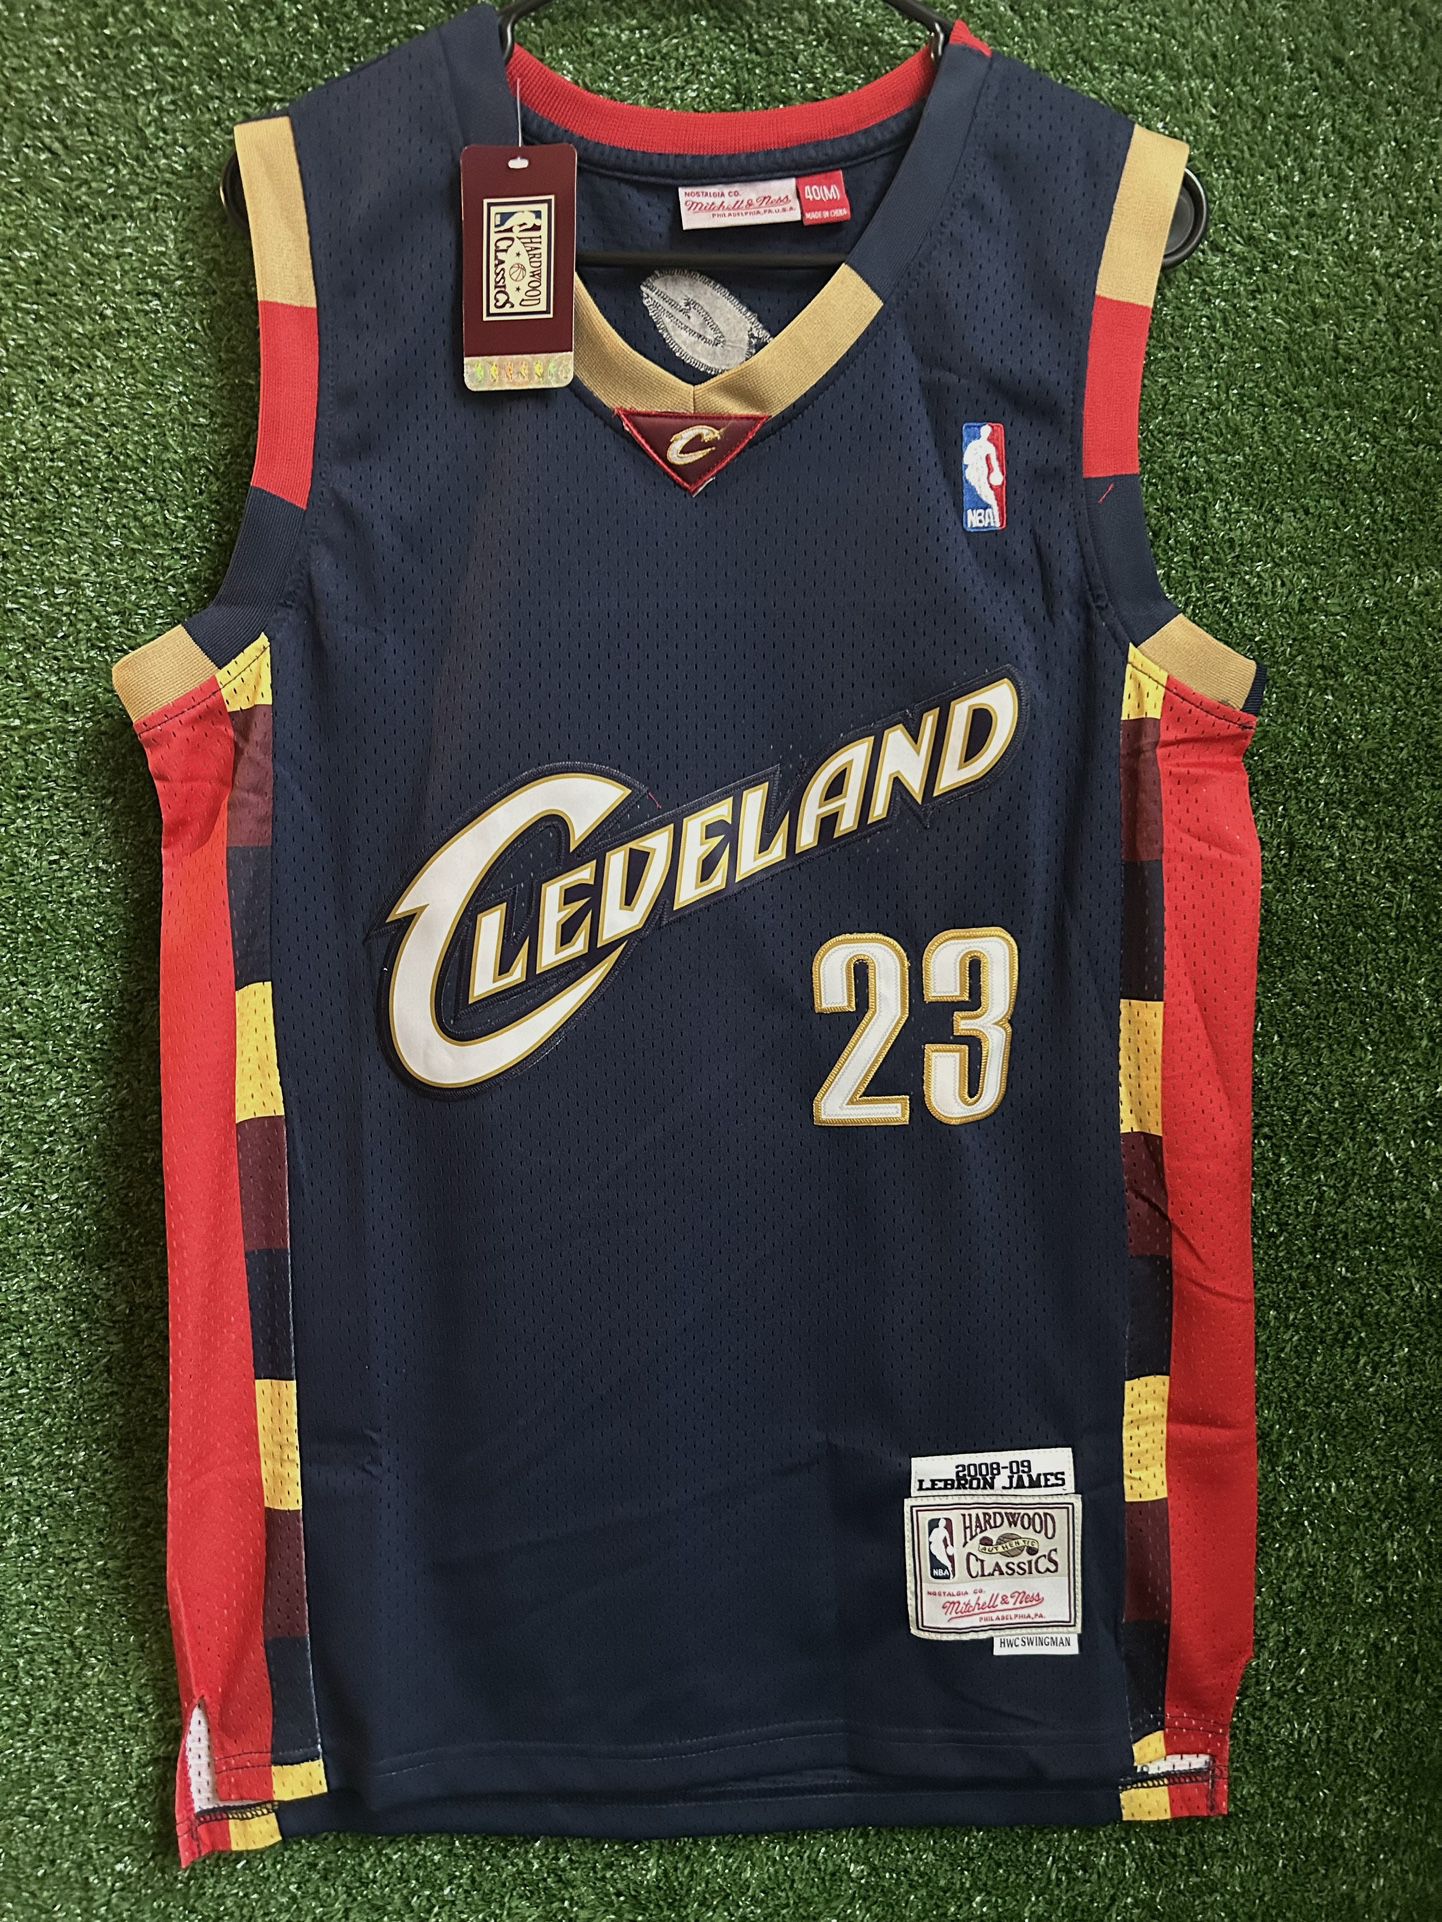 LEBRON JAMES CLEVELAND CAVALIERS MITCHELL & NESS JERSEY BRAND NEW WITH TAGS SIZES MEDIUM, LARGE AND XL AVAILABLE